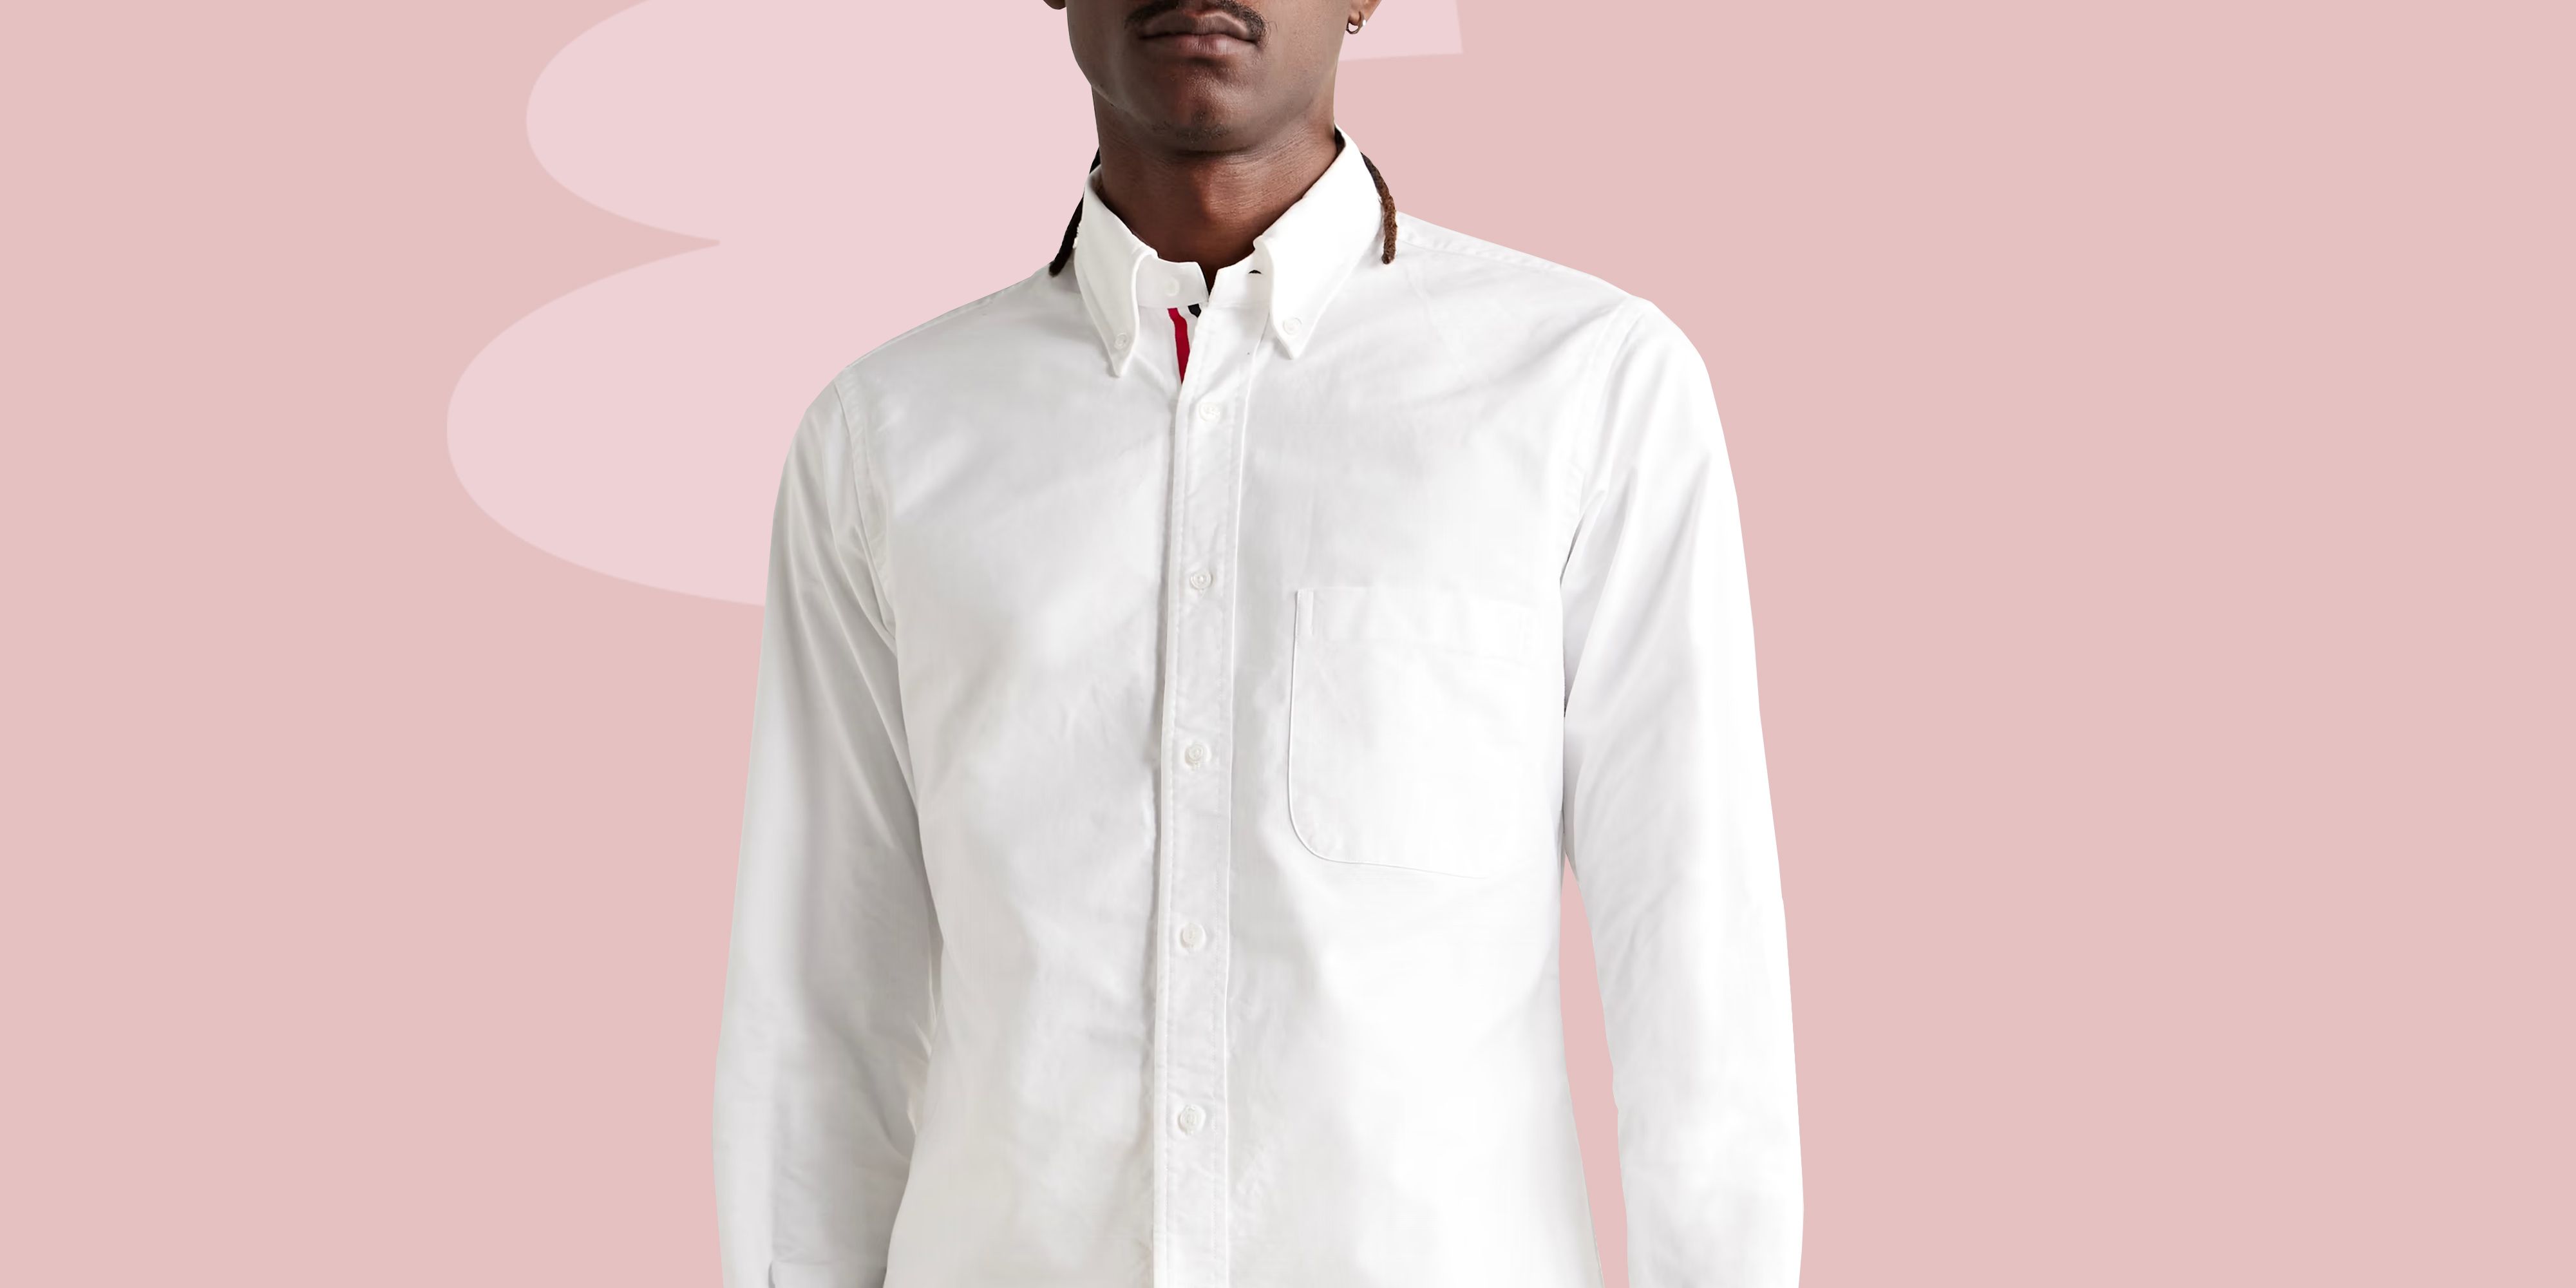 Washed Oxford Shirt For Tall Men White